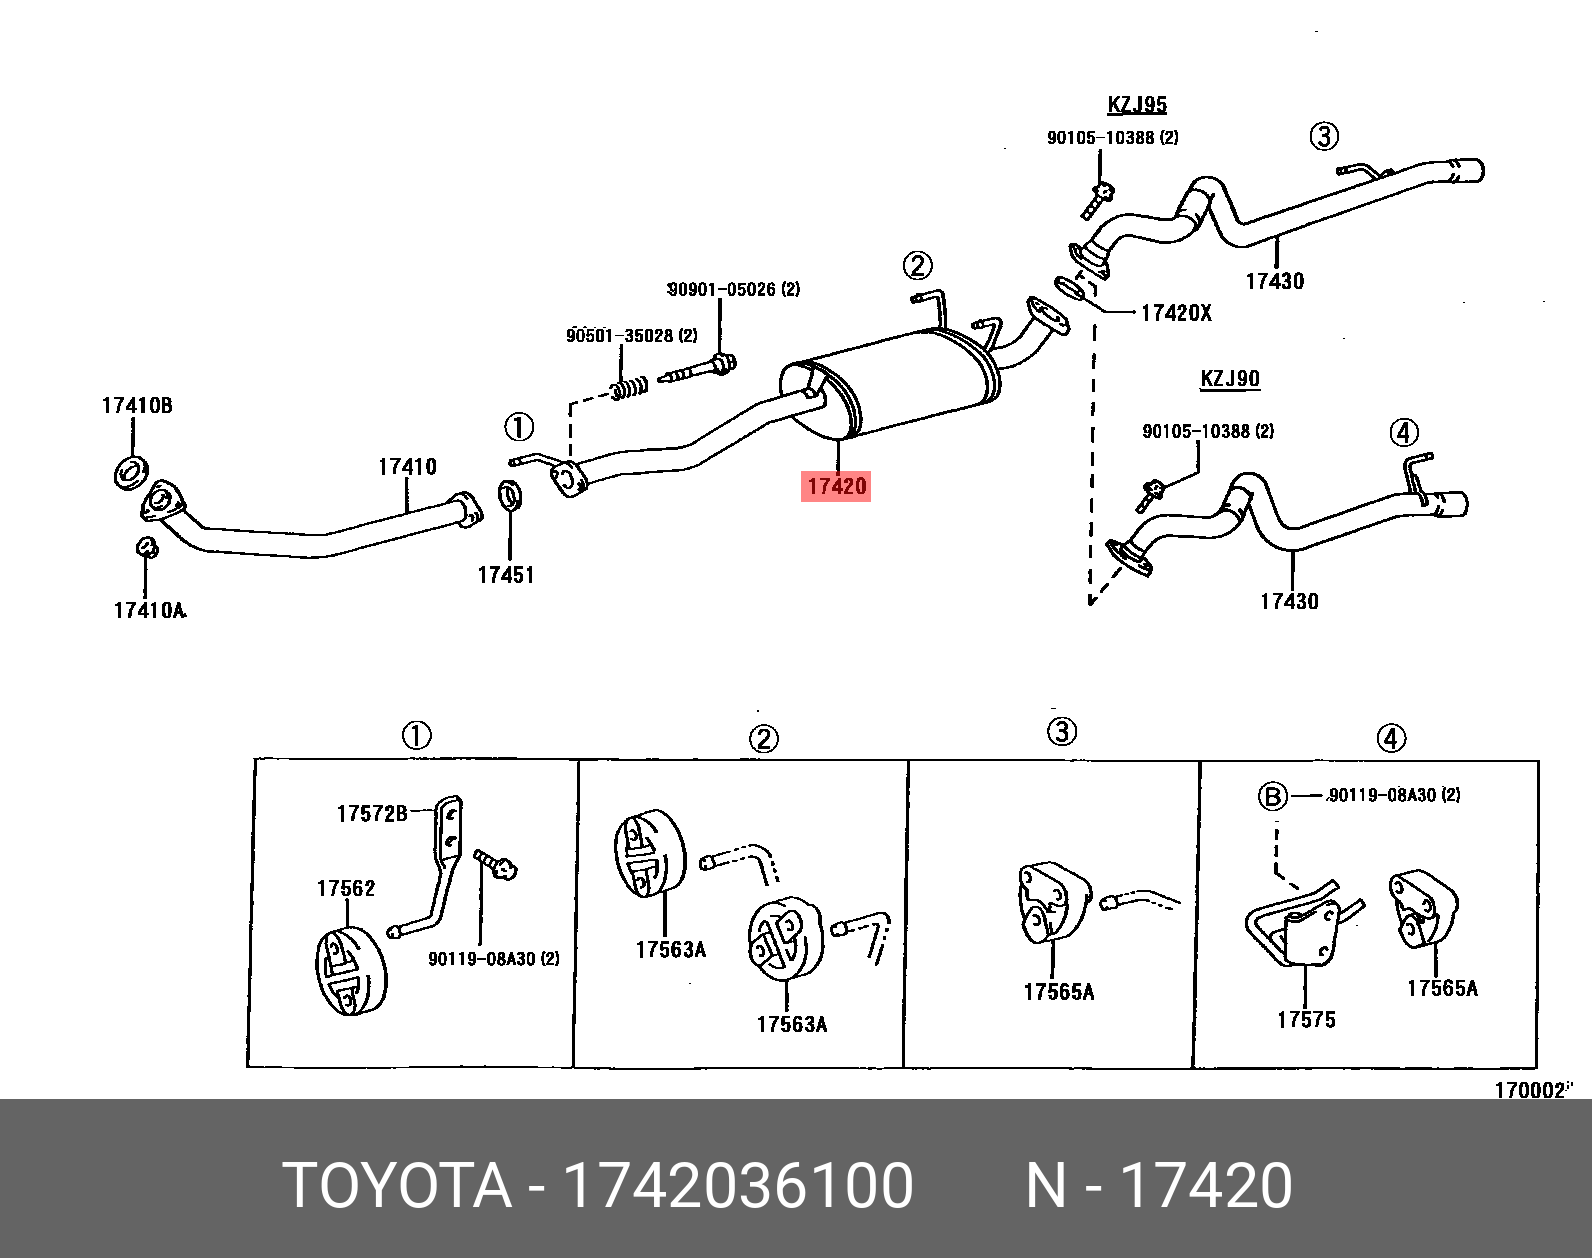 CAMRY HYBRID 201108 - 201704, PIPE ASSY, EXHAUST, CENTER